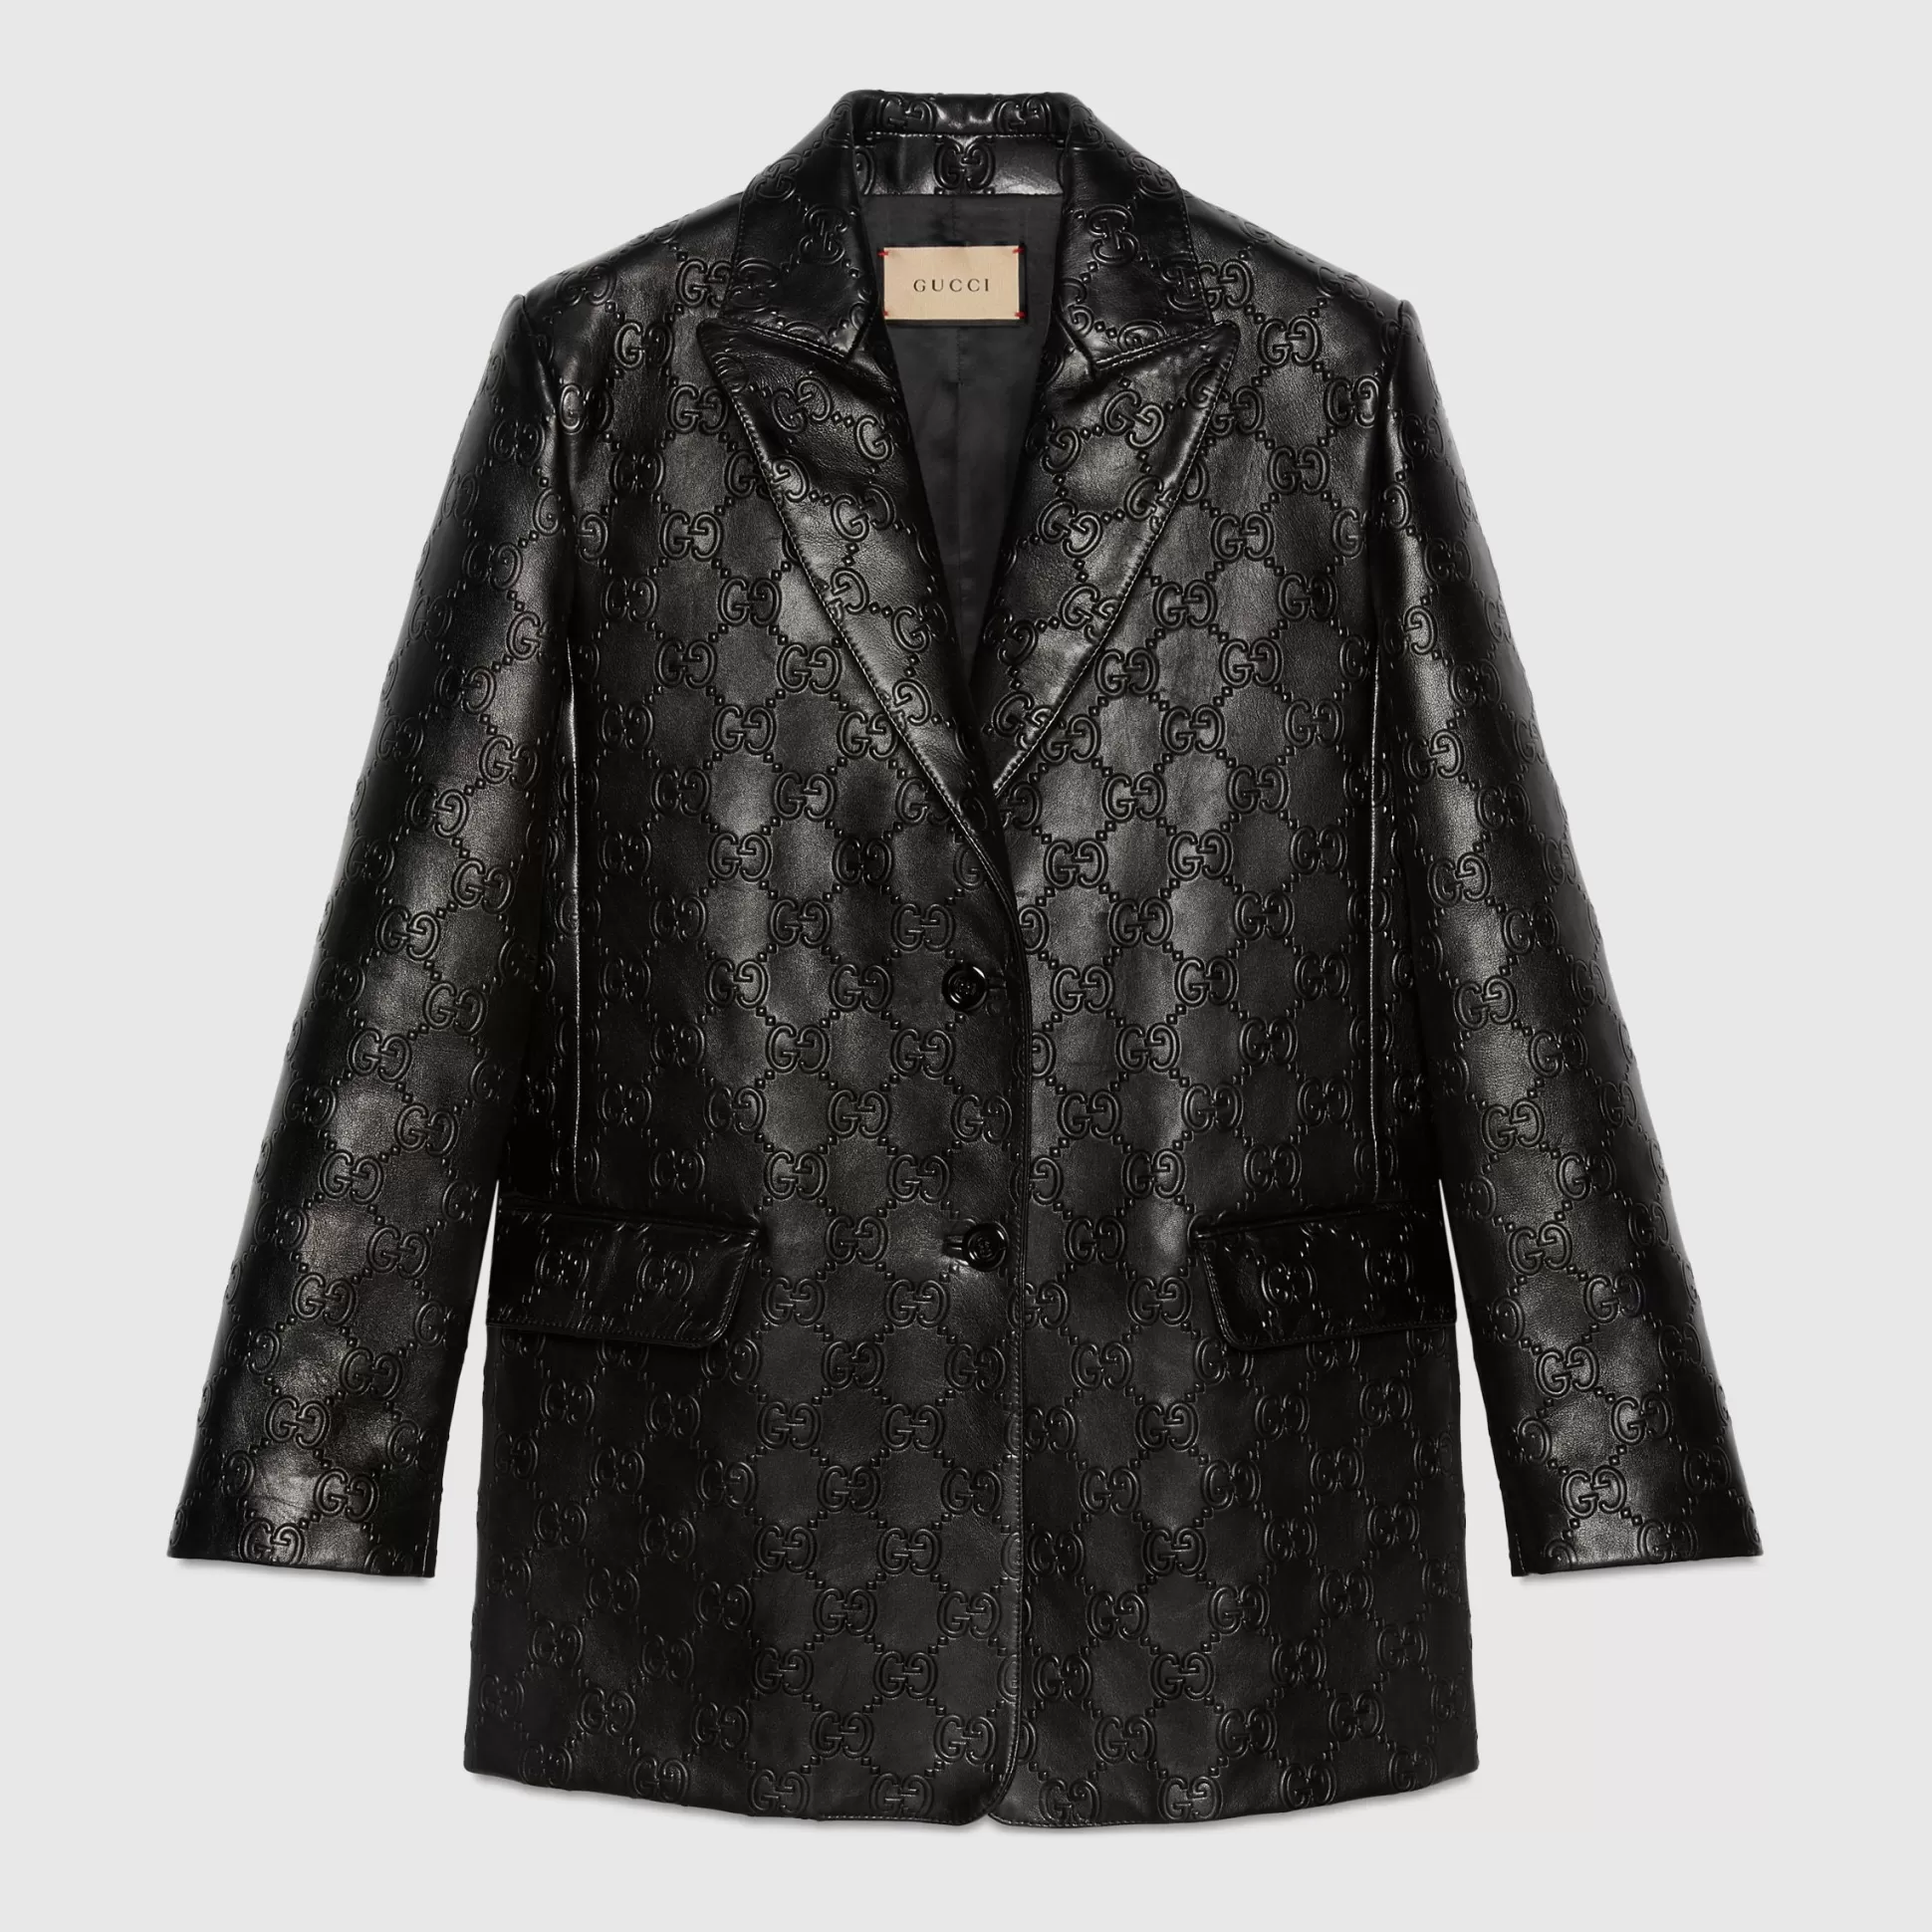 GUCCI Embossed Gg Leather Jacket-Women Leather